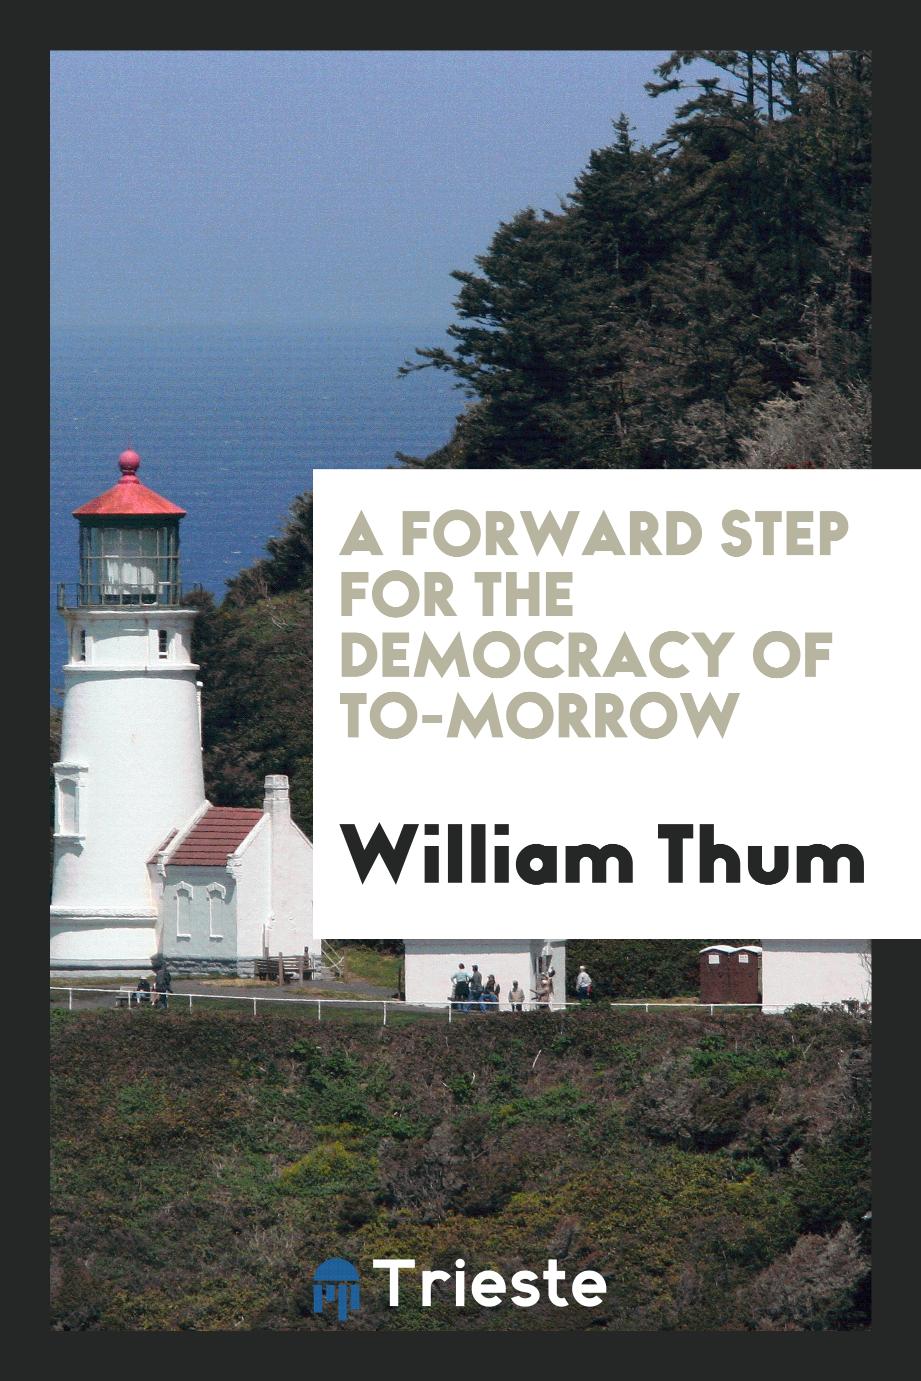 A Forward Step for the Democracy of To-Morrow